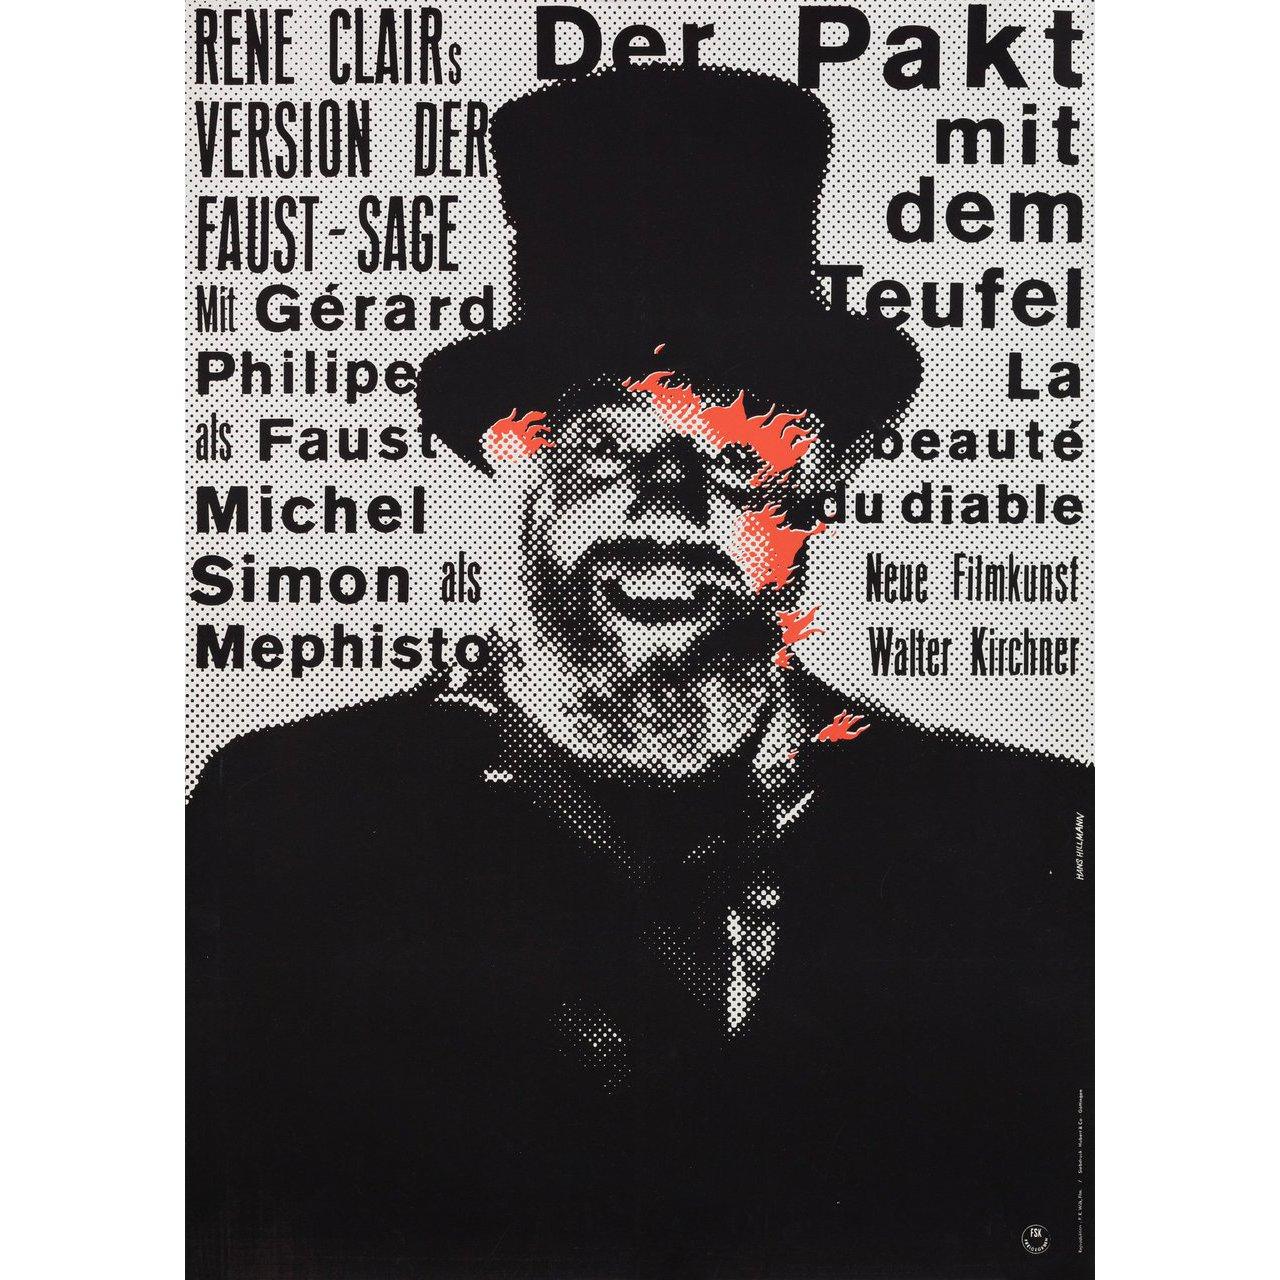 Original 1962 re-release German A1 poster by Hans Hillmann for the 1950 film Beauty and the Devil (La beaute du diable) directed by Rene Clair with Michel Simon / Gerard Philipe / Nicole Besnard / Simone Valere. Very Good-Fine condition, rolled.